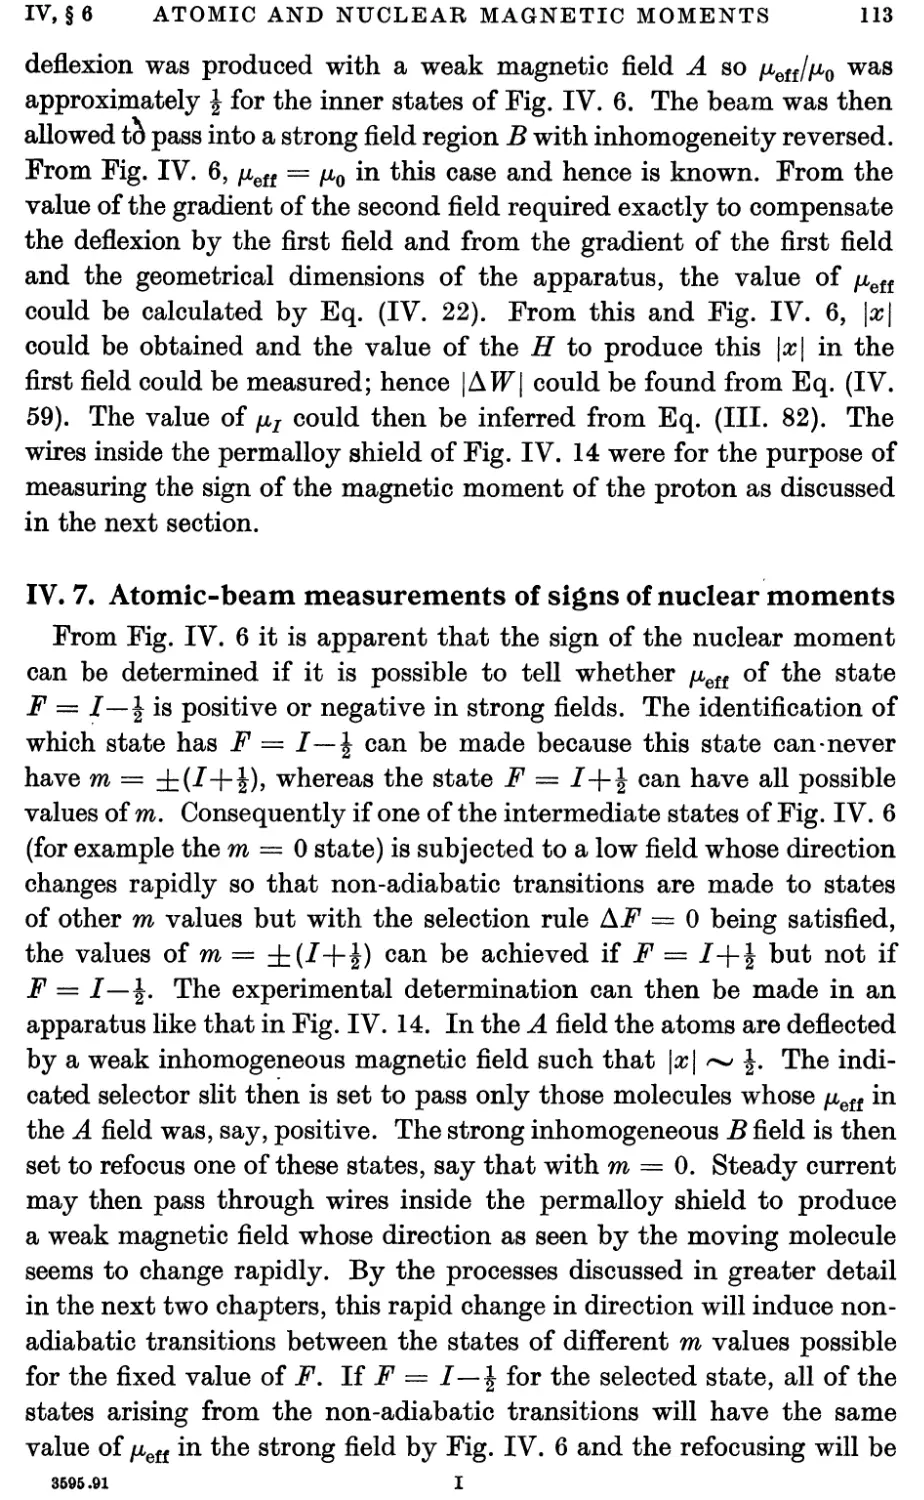 IV.7. Atomic-beam Measurements of Signs of Nuclear Moments